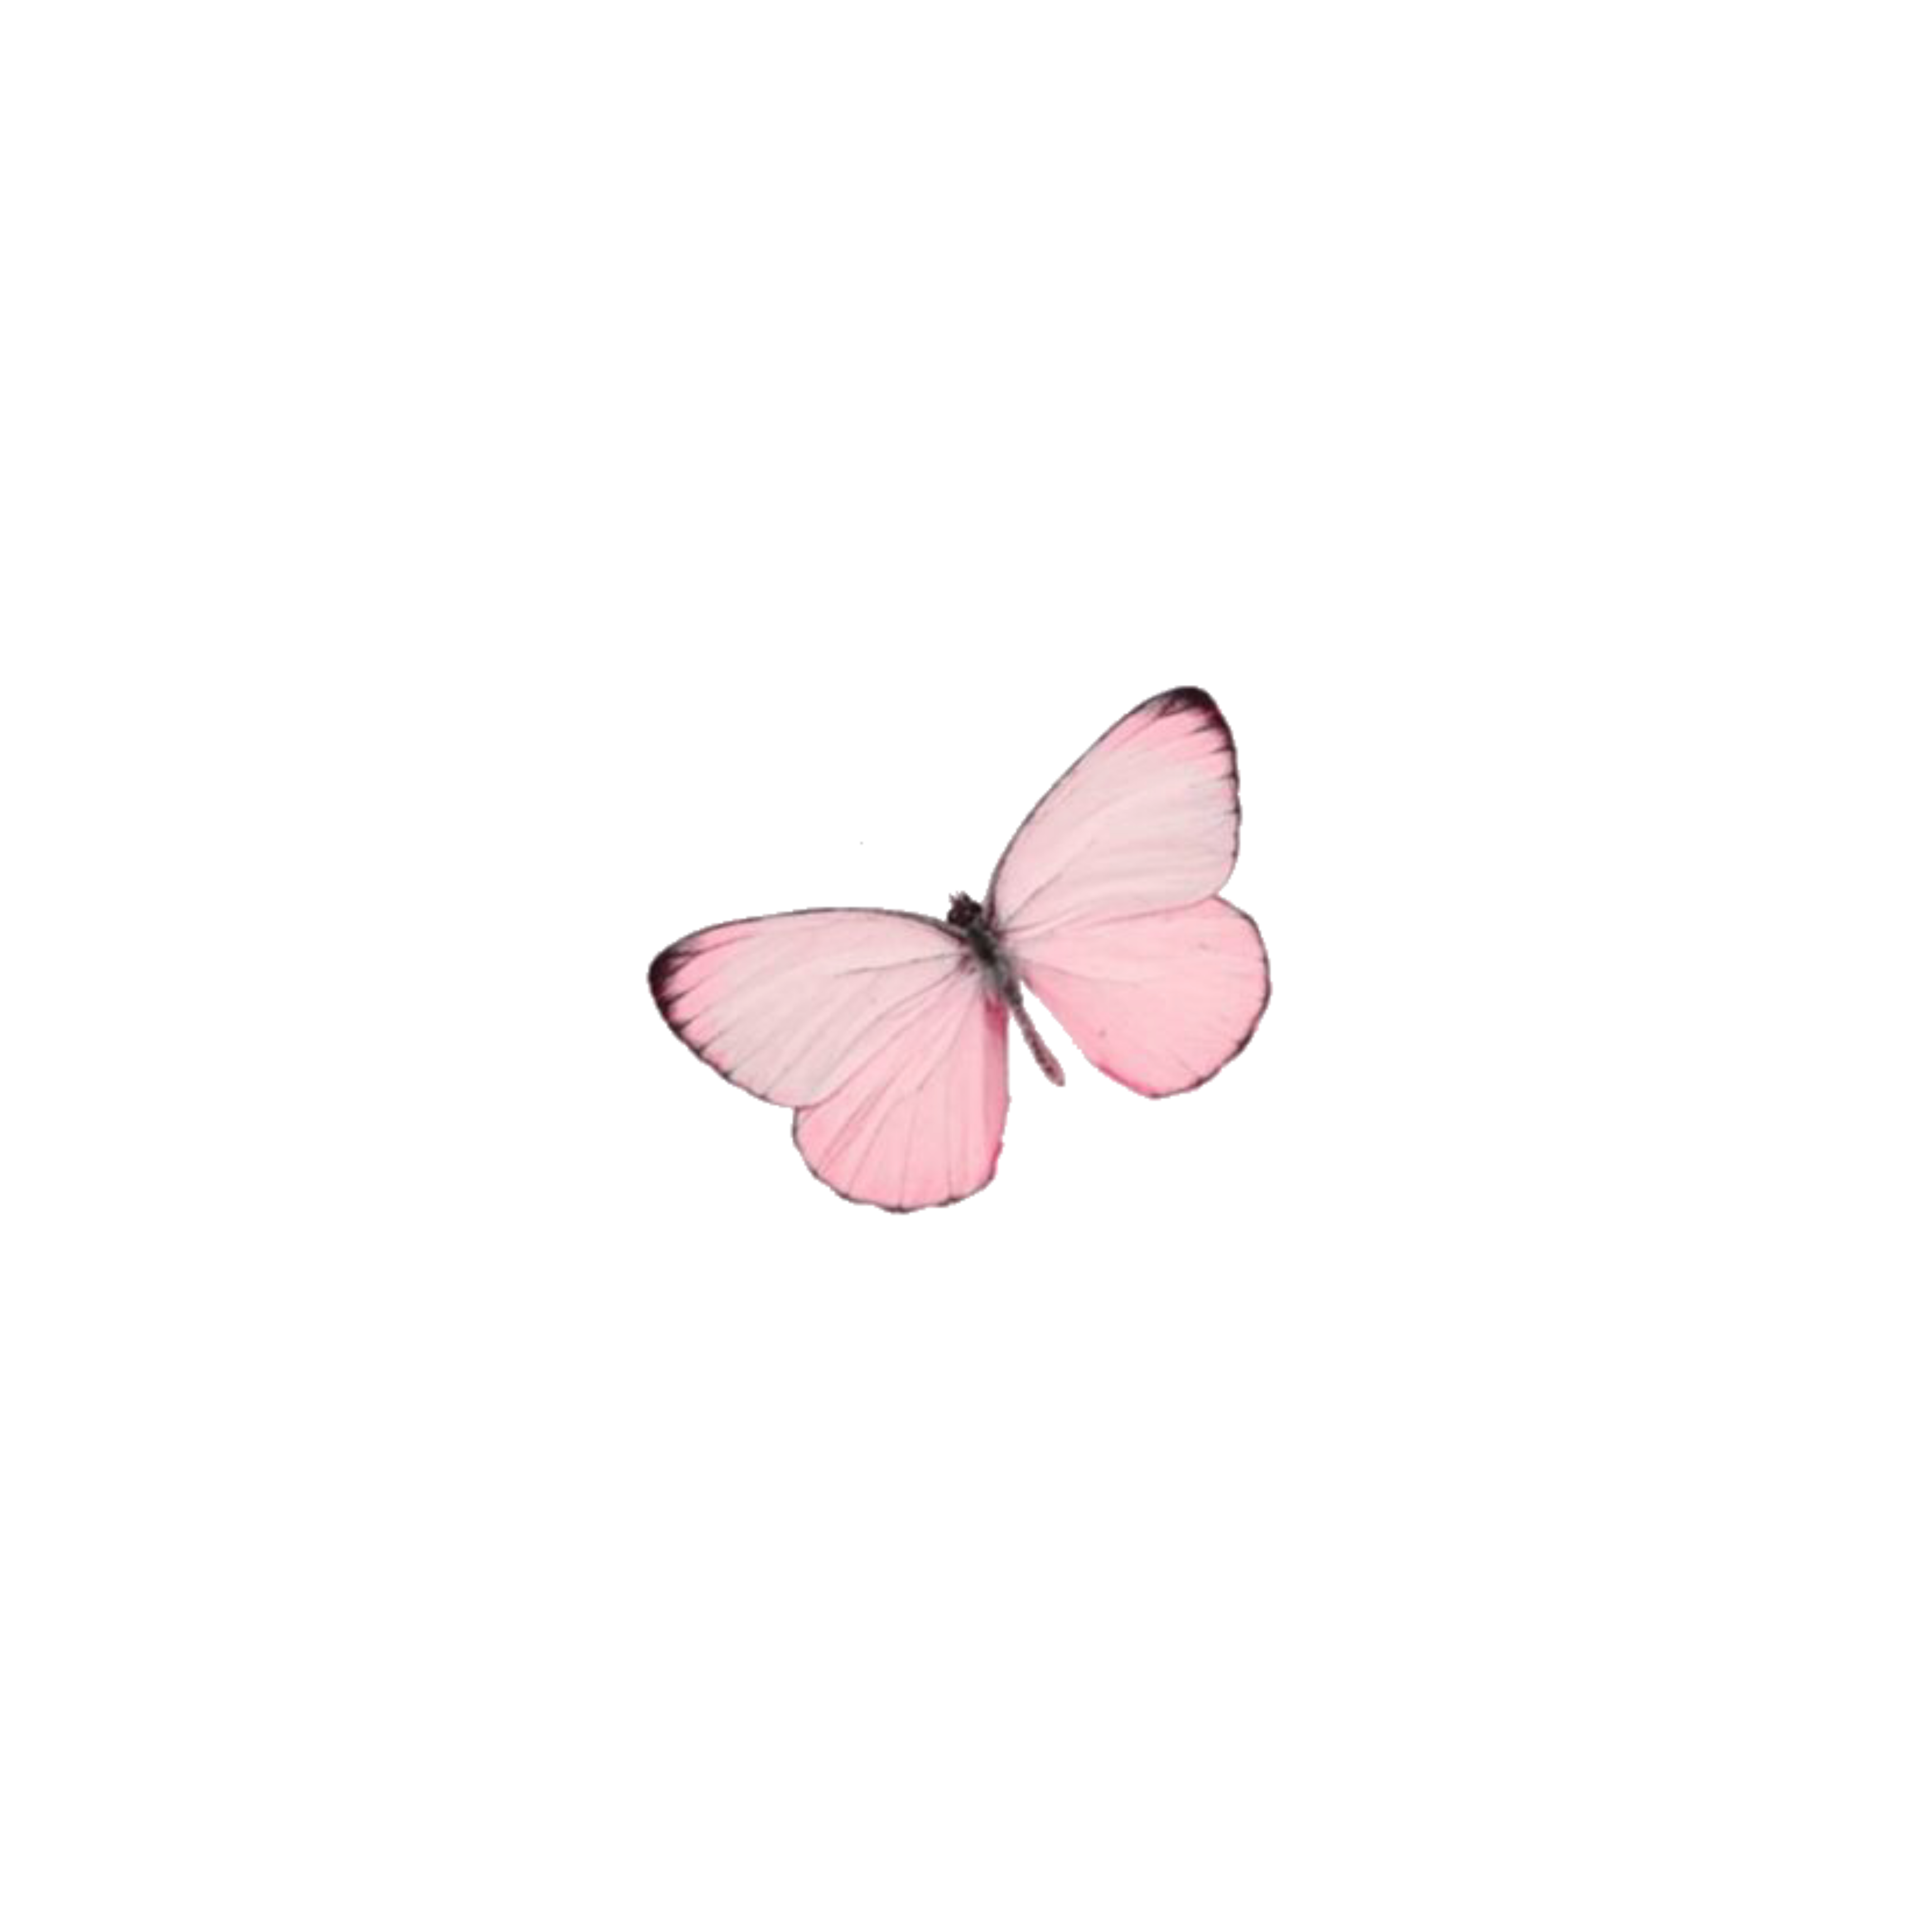 soft messy aesthetic butterfly pink pinkbitterfly cute...